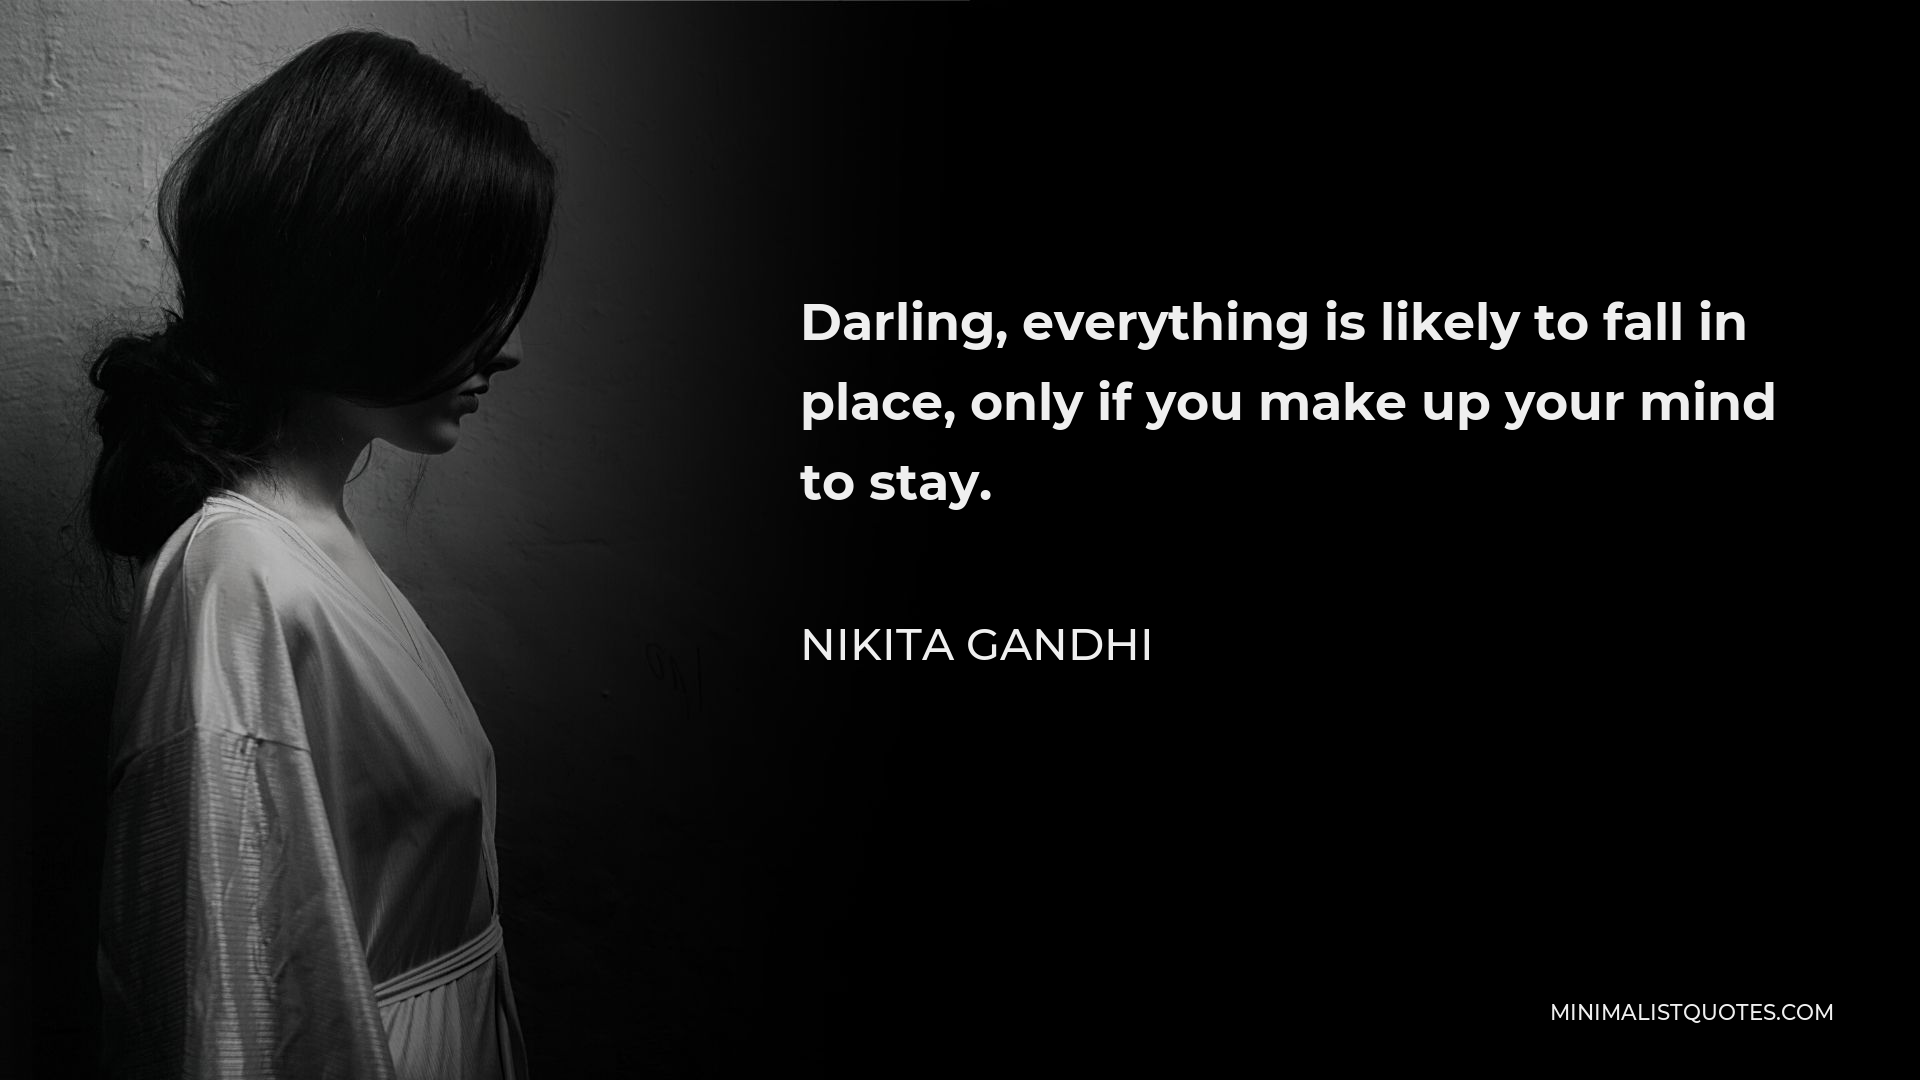 Nikita Gandhi Quote - Darling, everything is likely to fall in place, only if you make up your mind to stay.